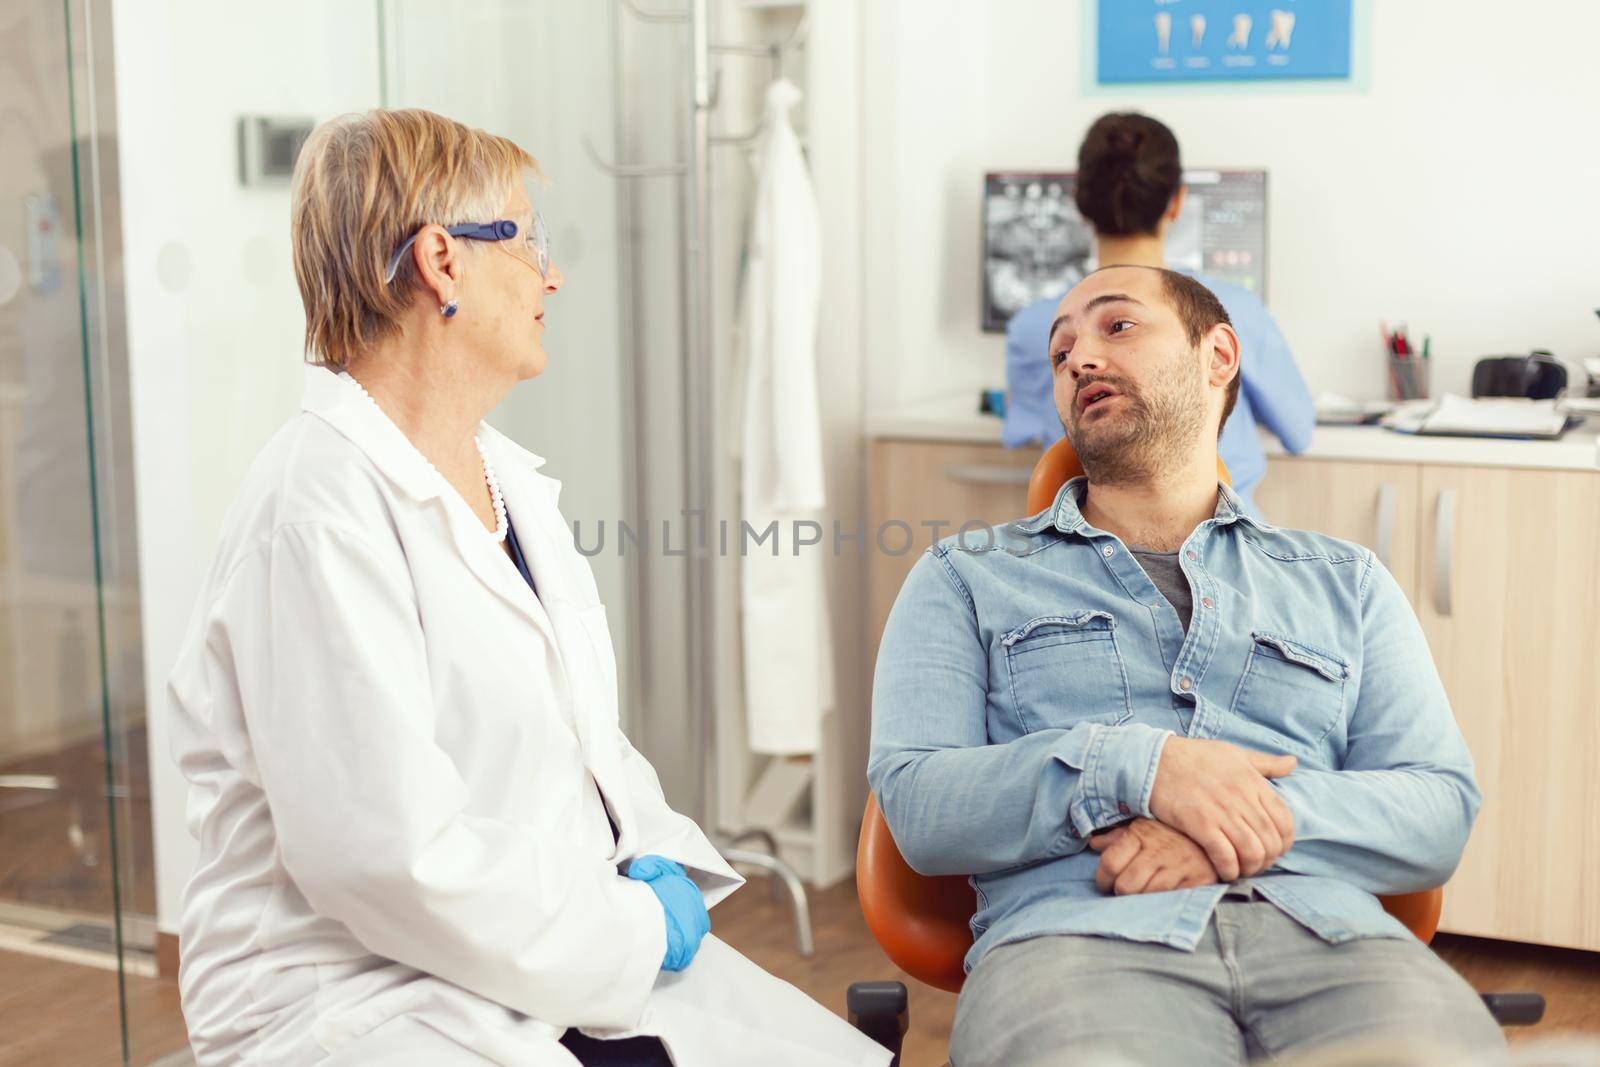 Senior doctor stomatologist discussing with patient before examining oral health while sitting on dental chiar in hospital stomatology office. In background nurse checking tooth radiography